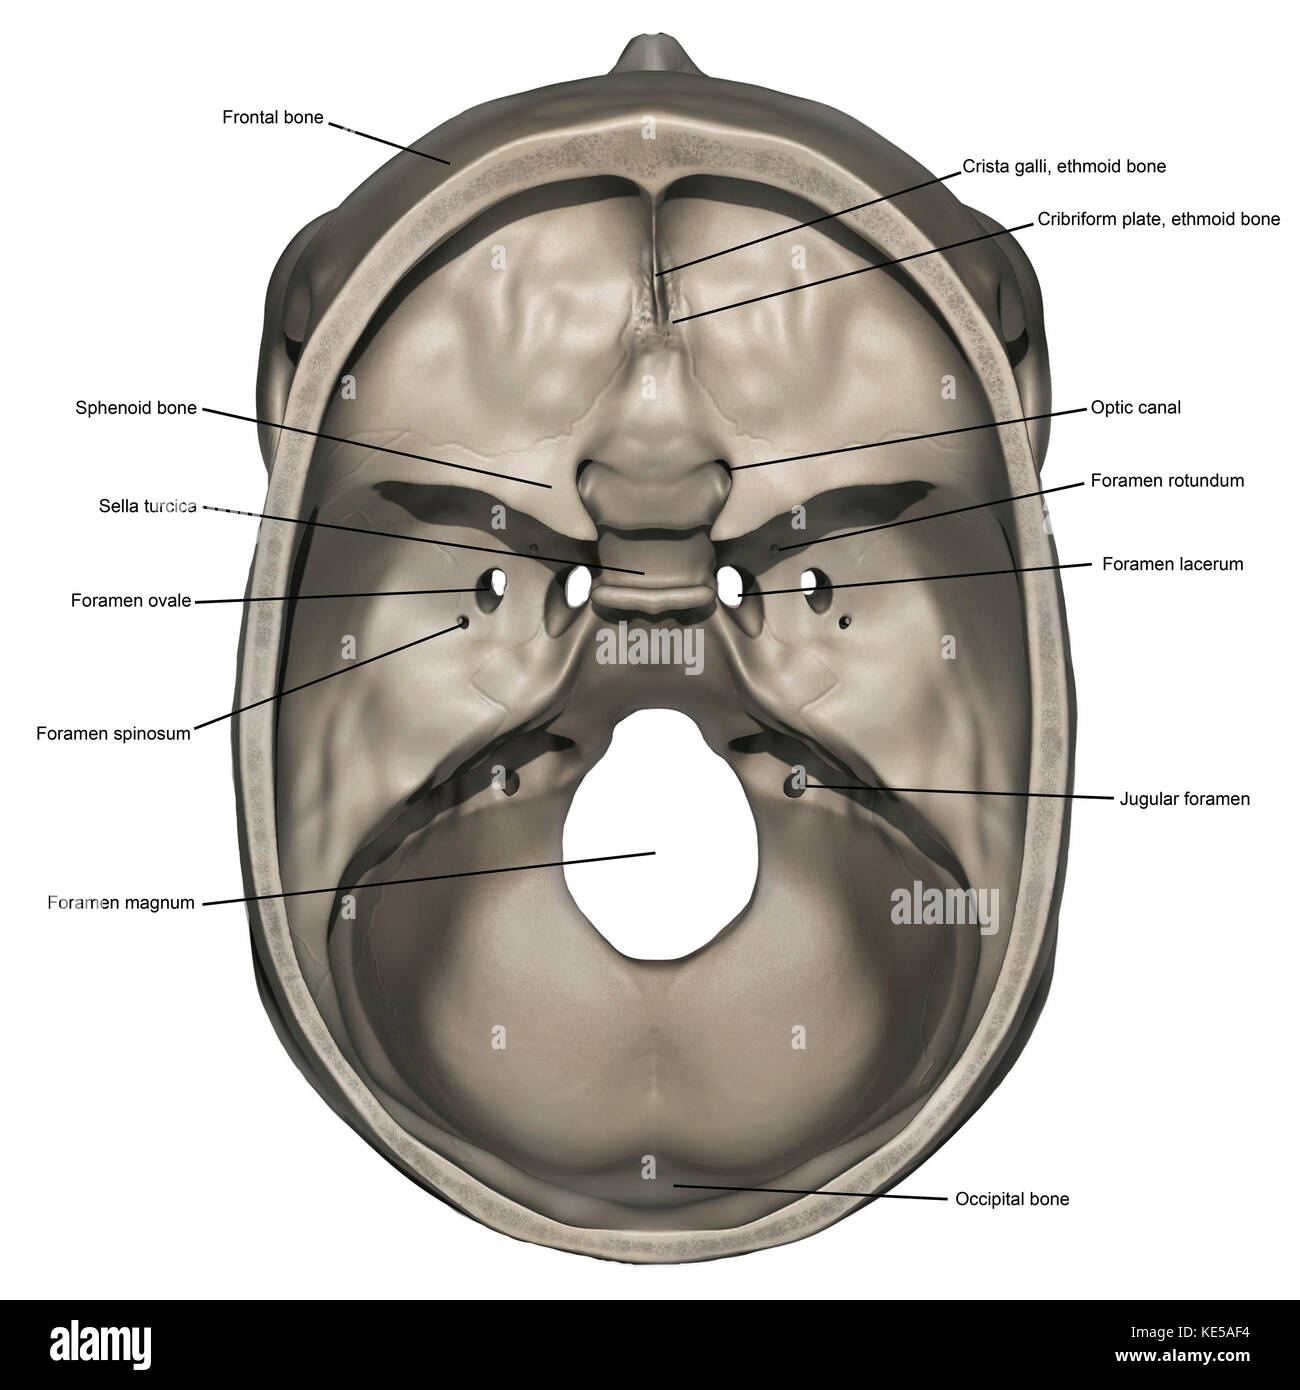 Superior view of human skull anatomy with annotations. Stock Photo